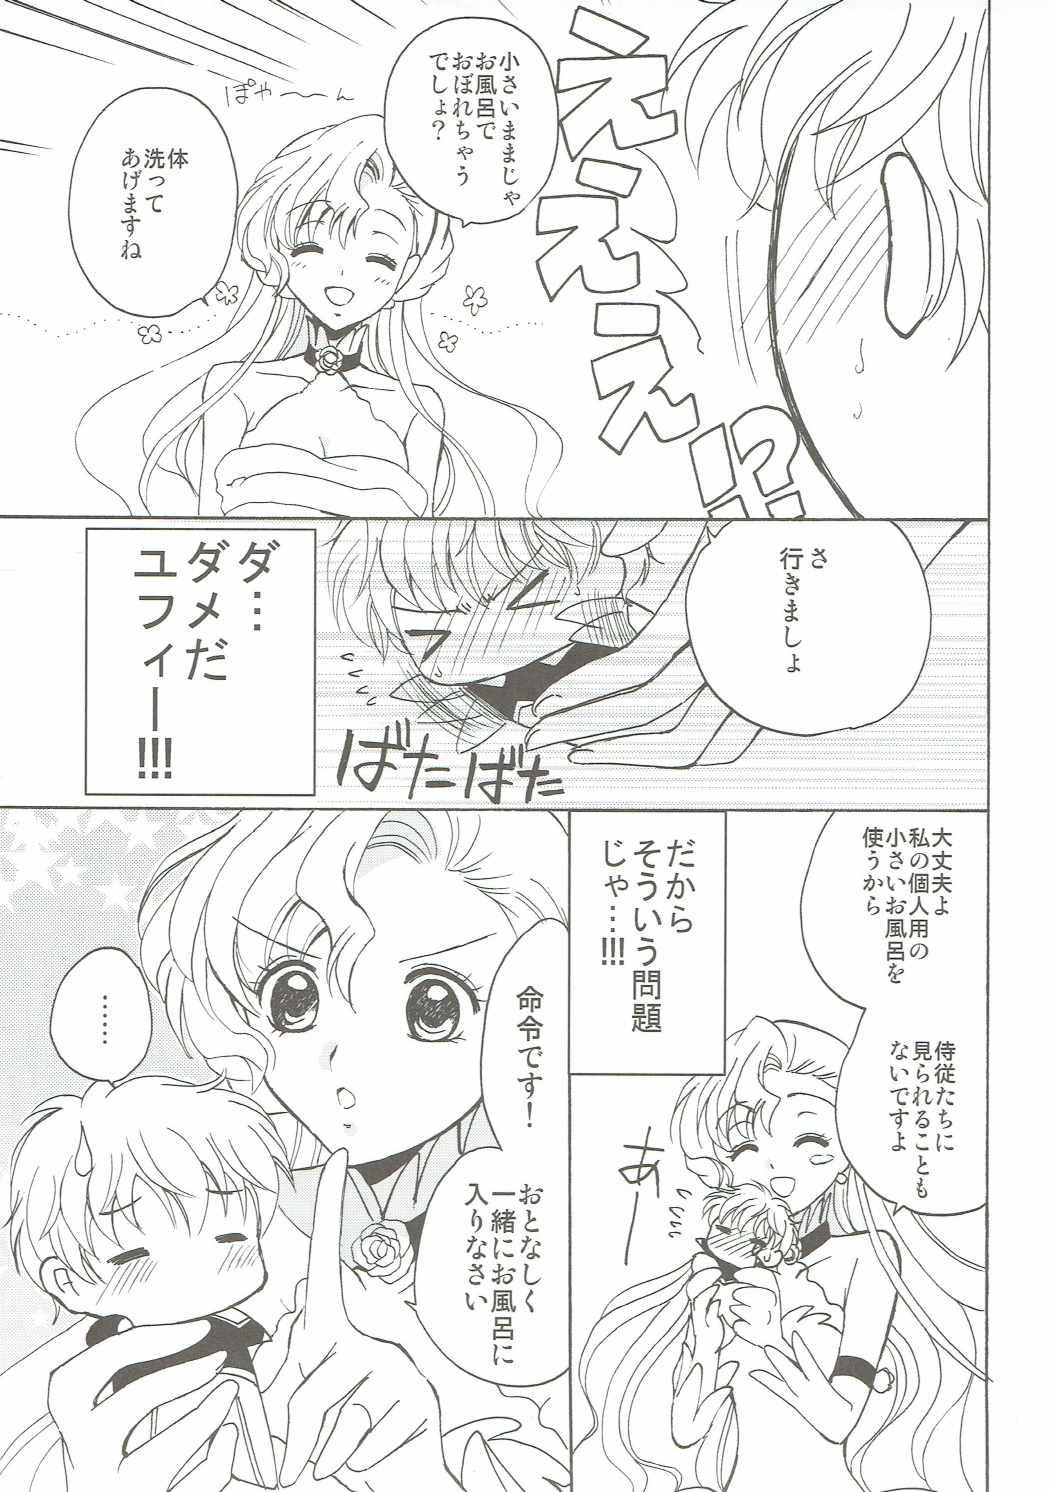 Para Lovely Baby - Code geass Rabo - Page 8